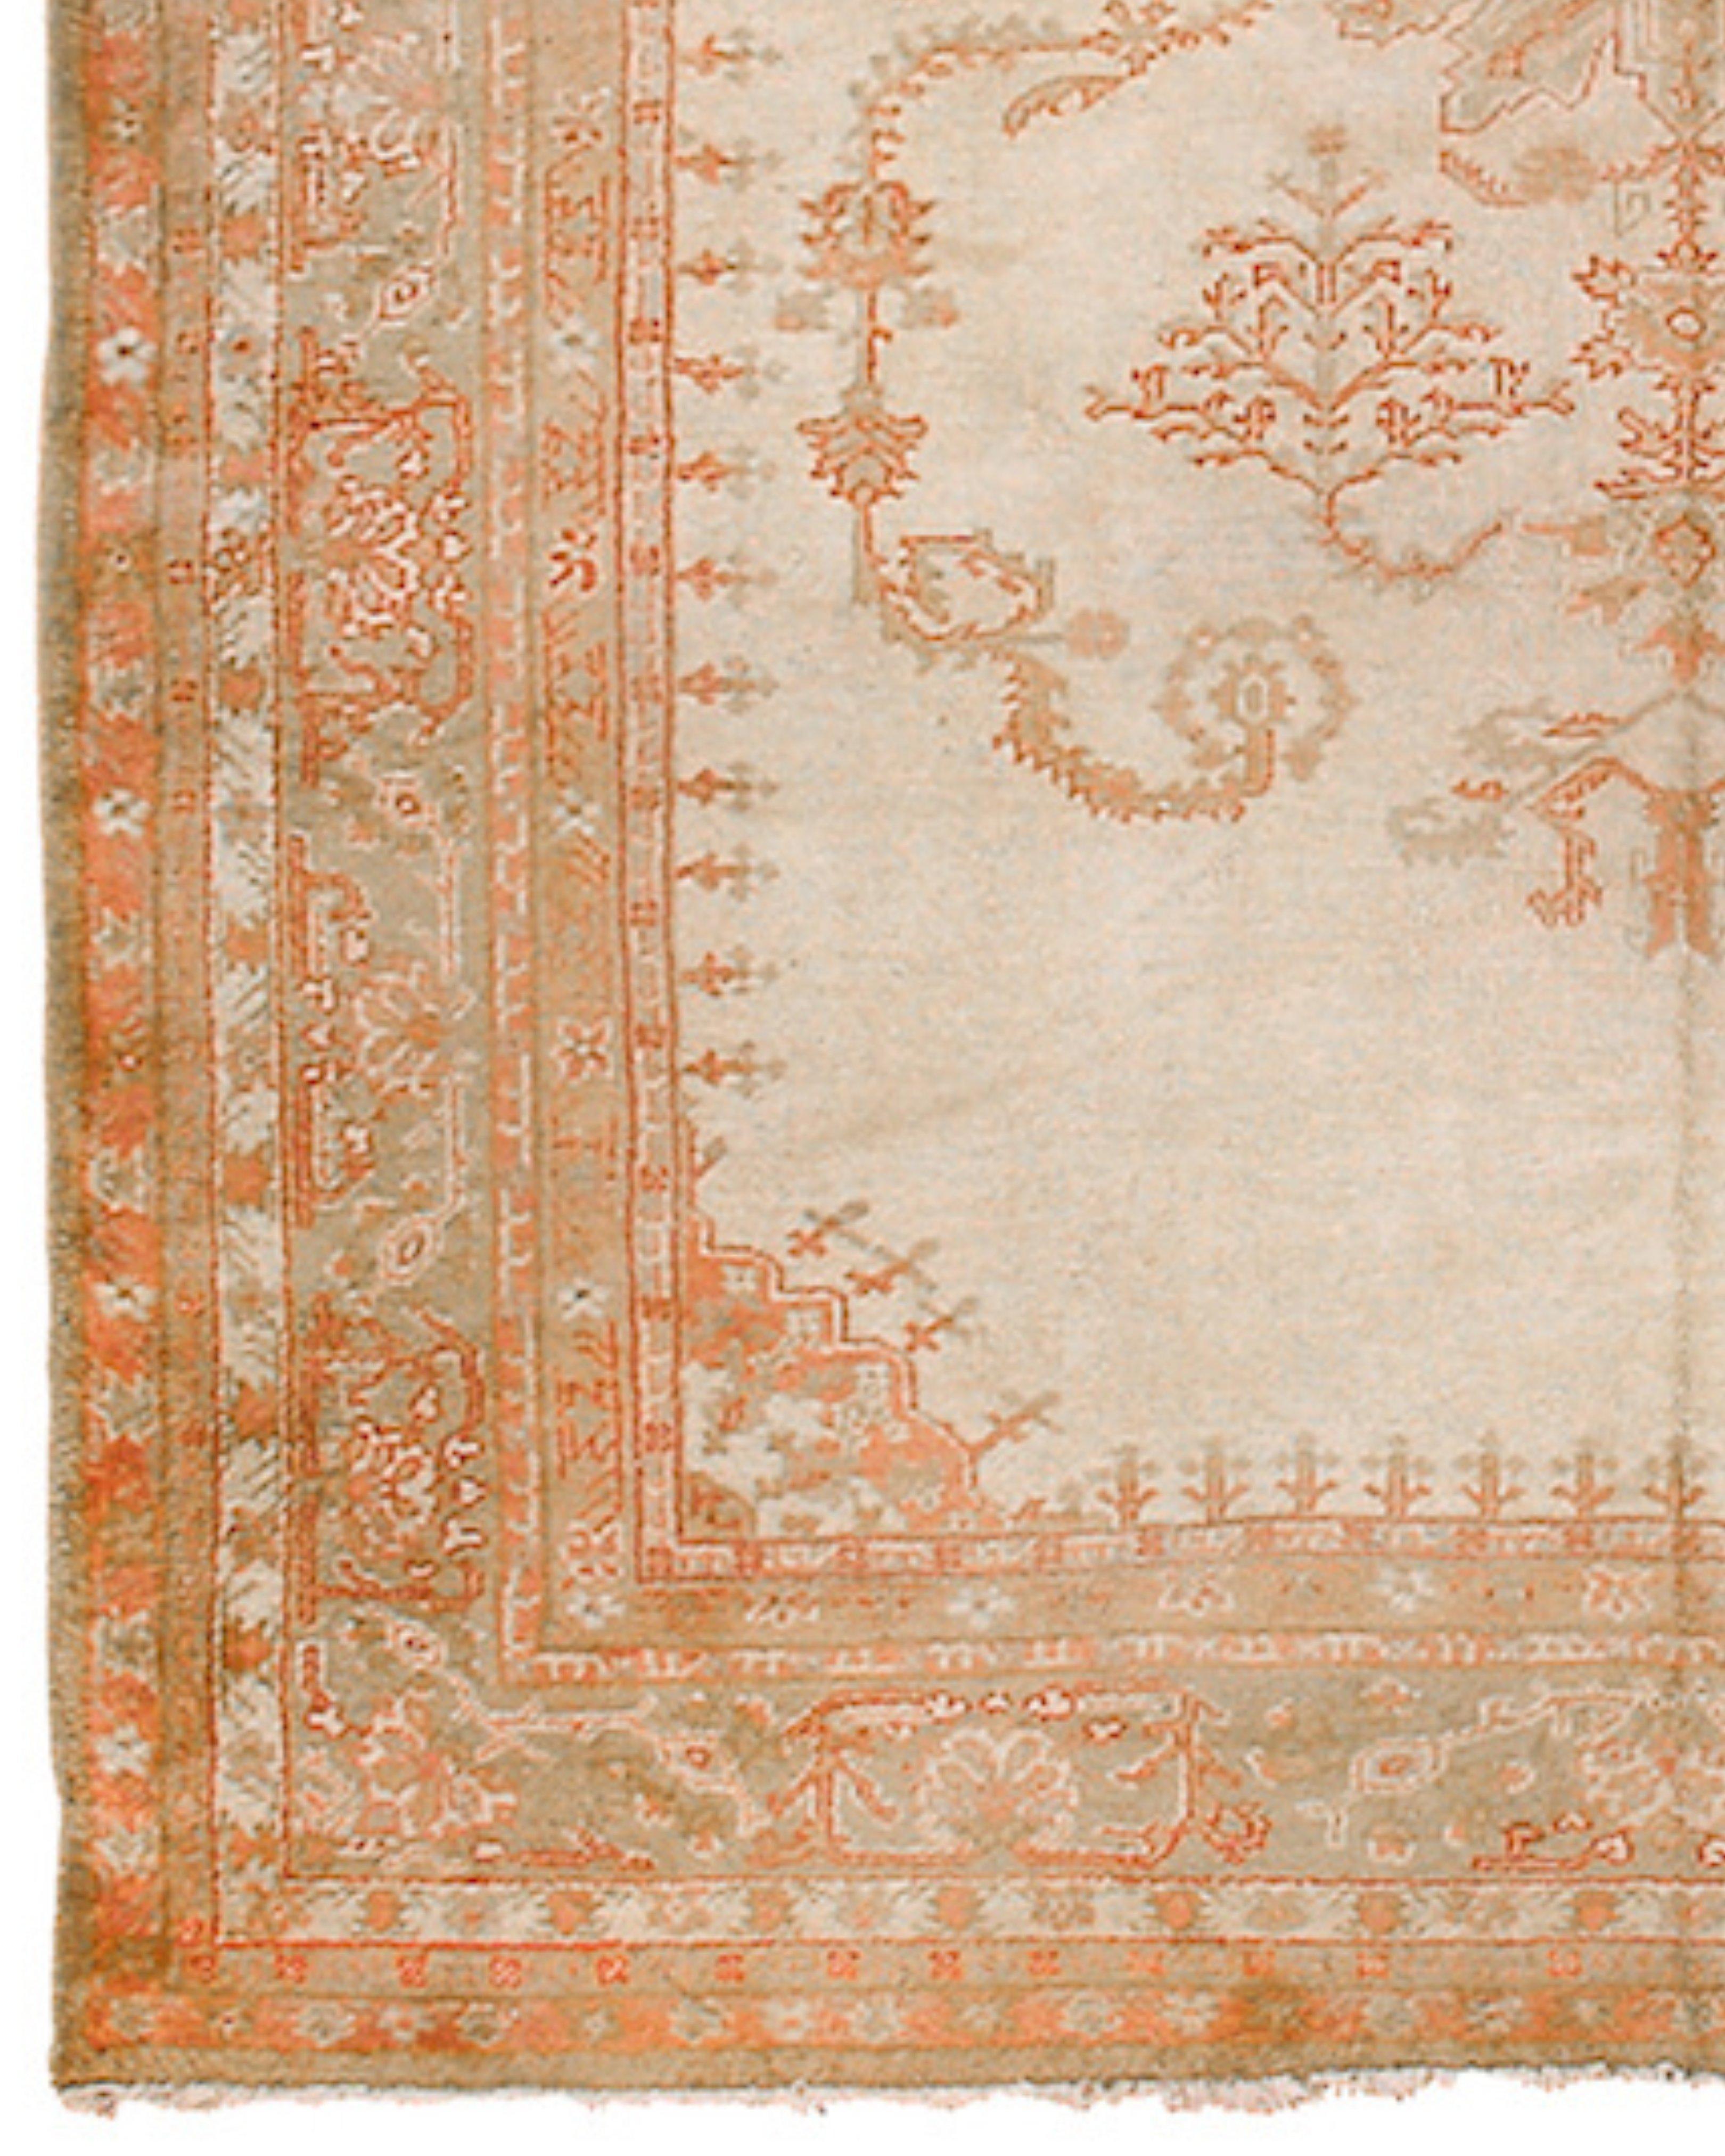 Hand-Woven Antique Anatolian Oushak Rug, 19th Century For Sale